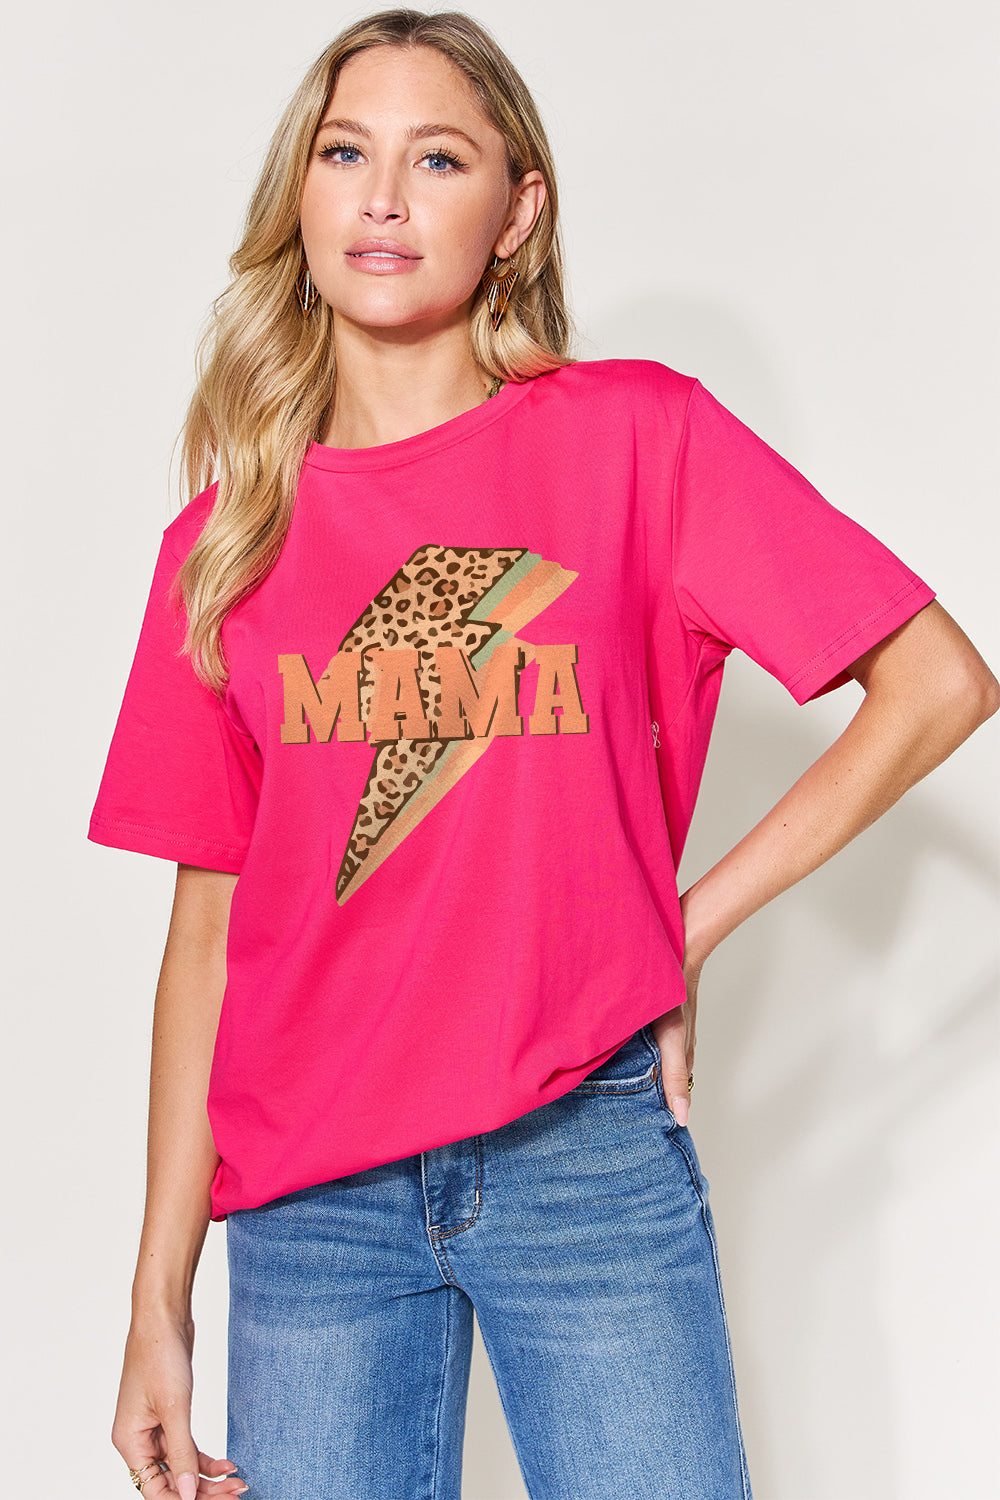 Simply Love Full Size MAMA Round Neck Short Sleeve T-Shirt